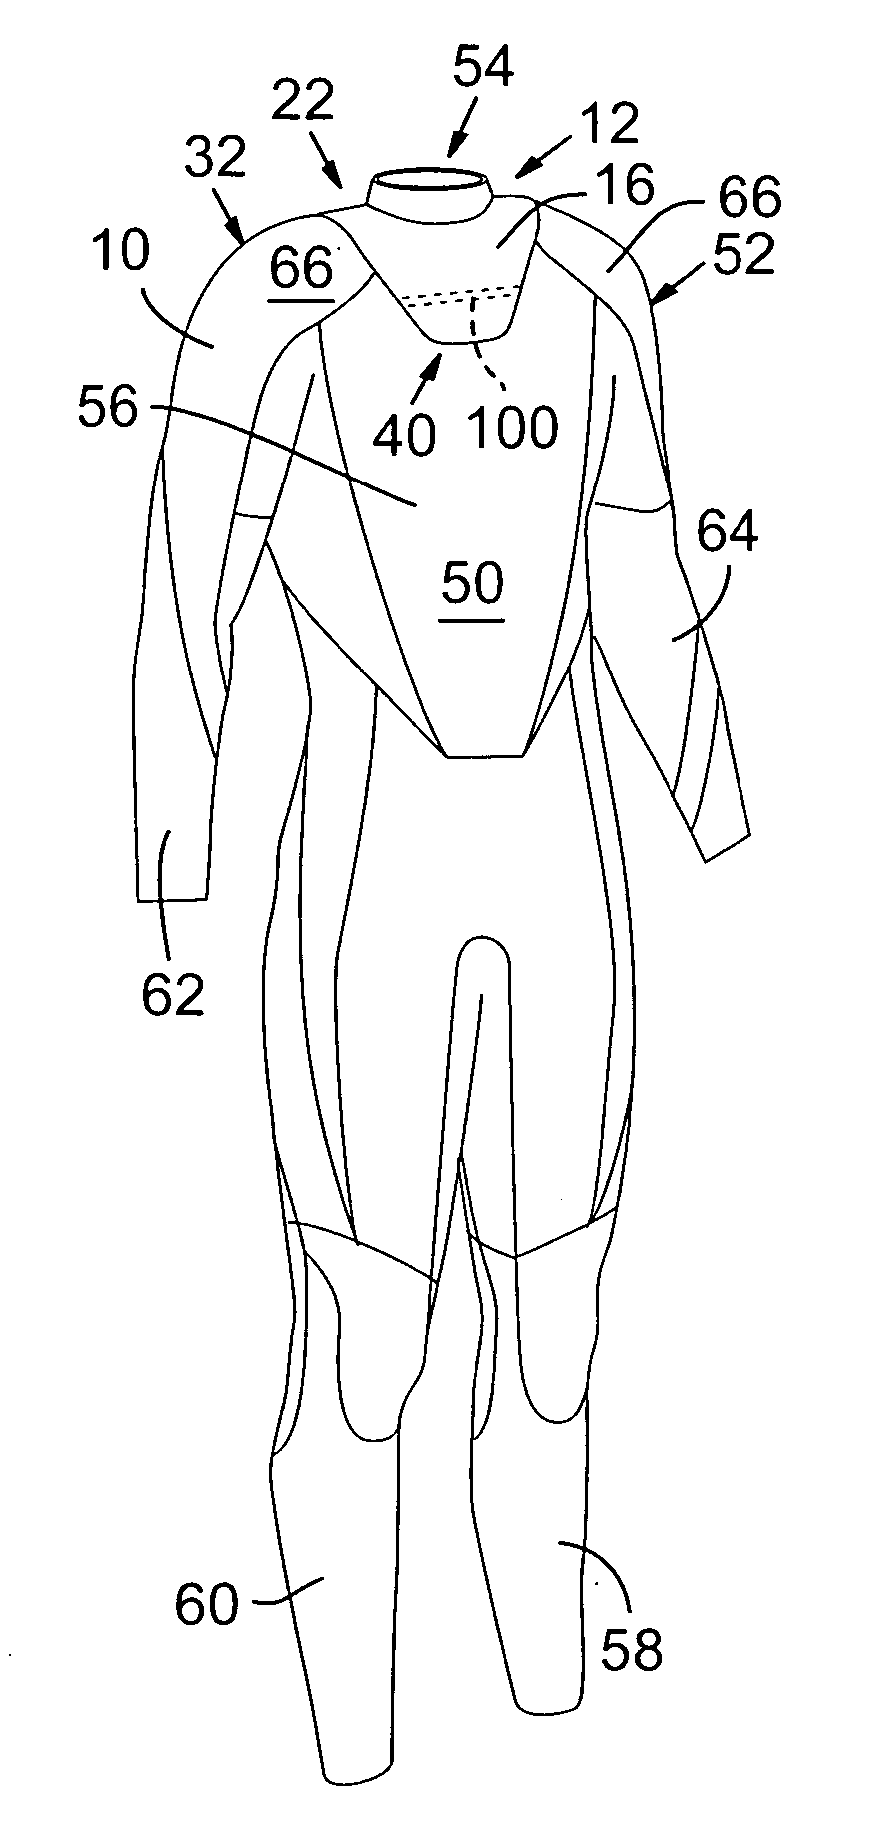 Wetsuit with flush resistant through shoulder entry system